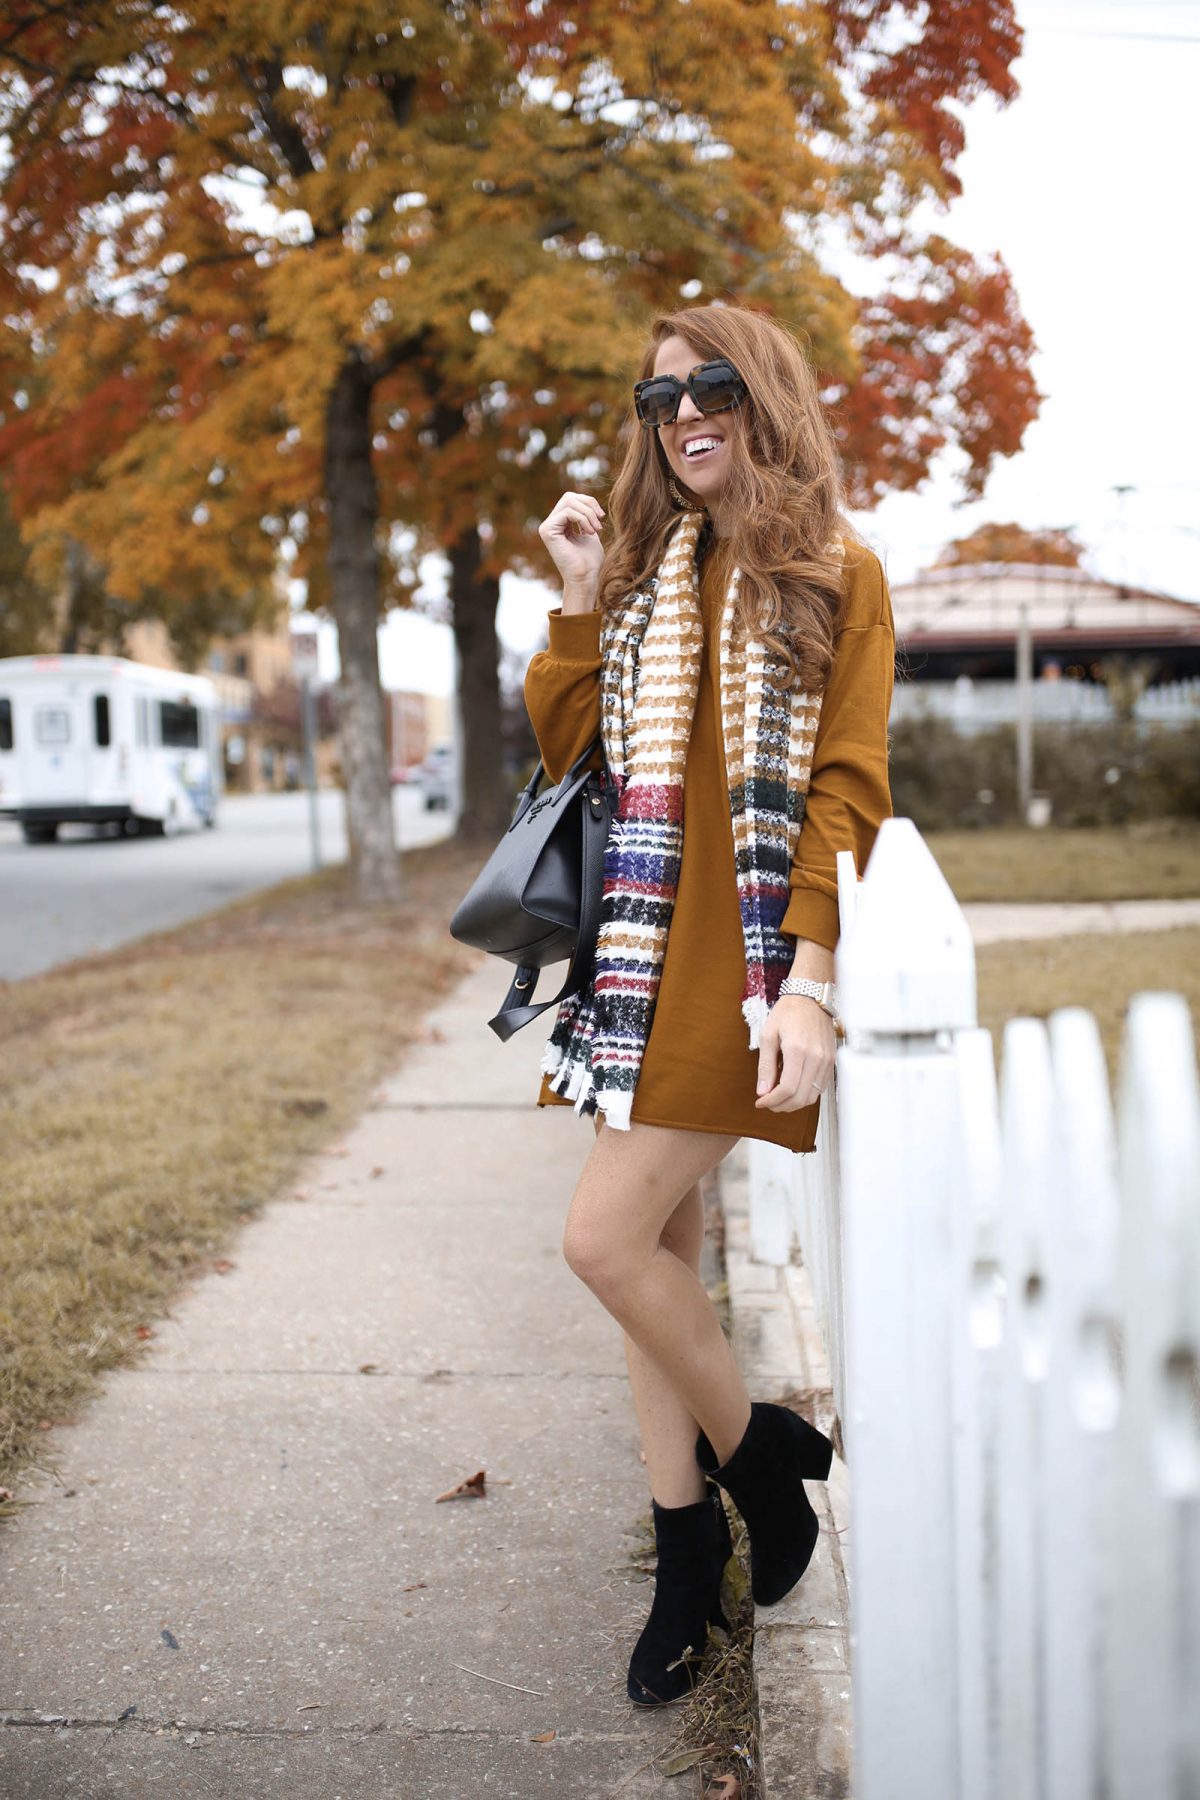 Two Fall Looks Under $50 - Jimmy Choos & Tennis Shoes